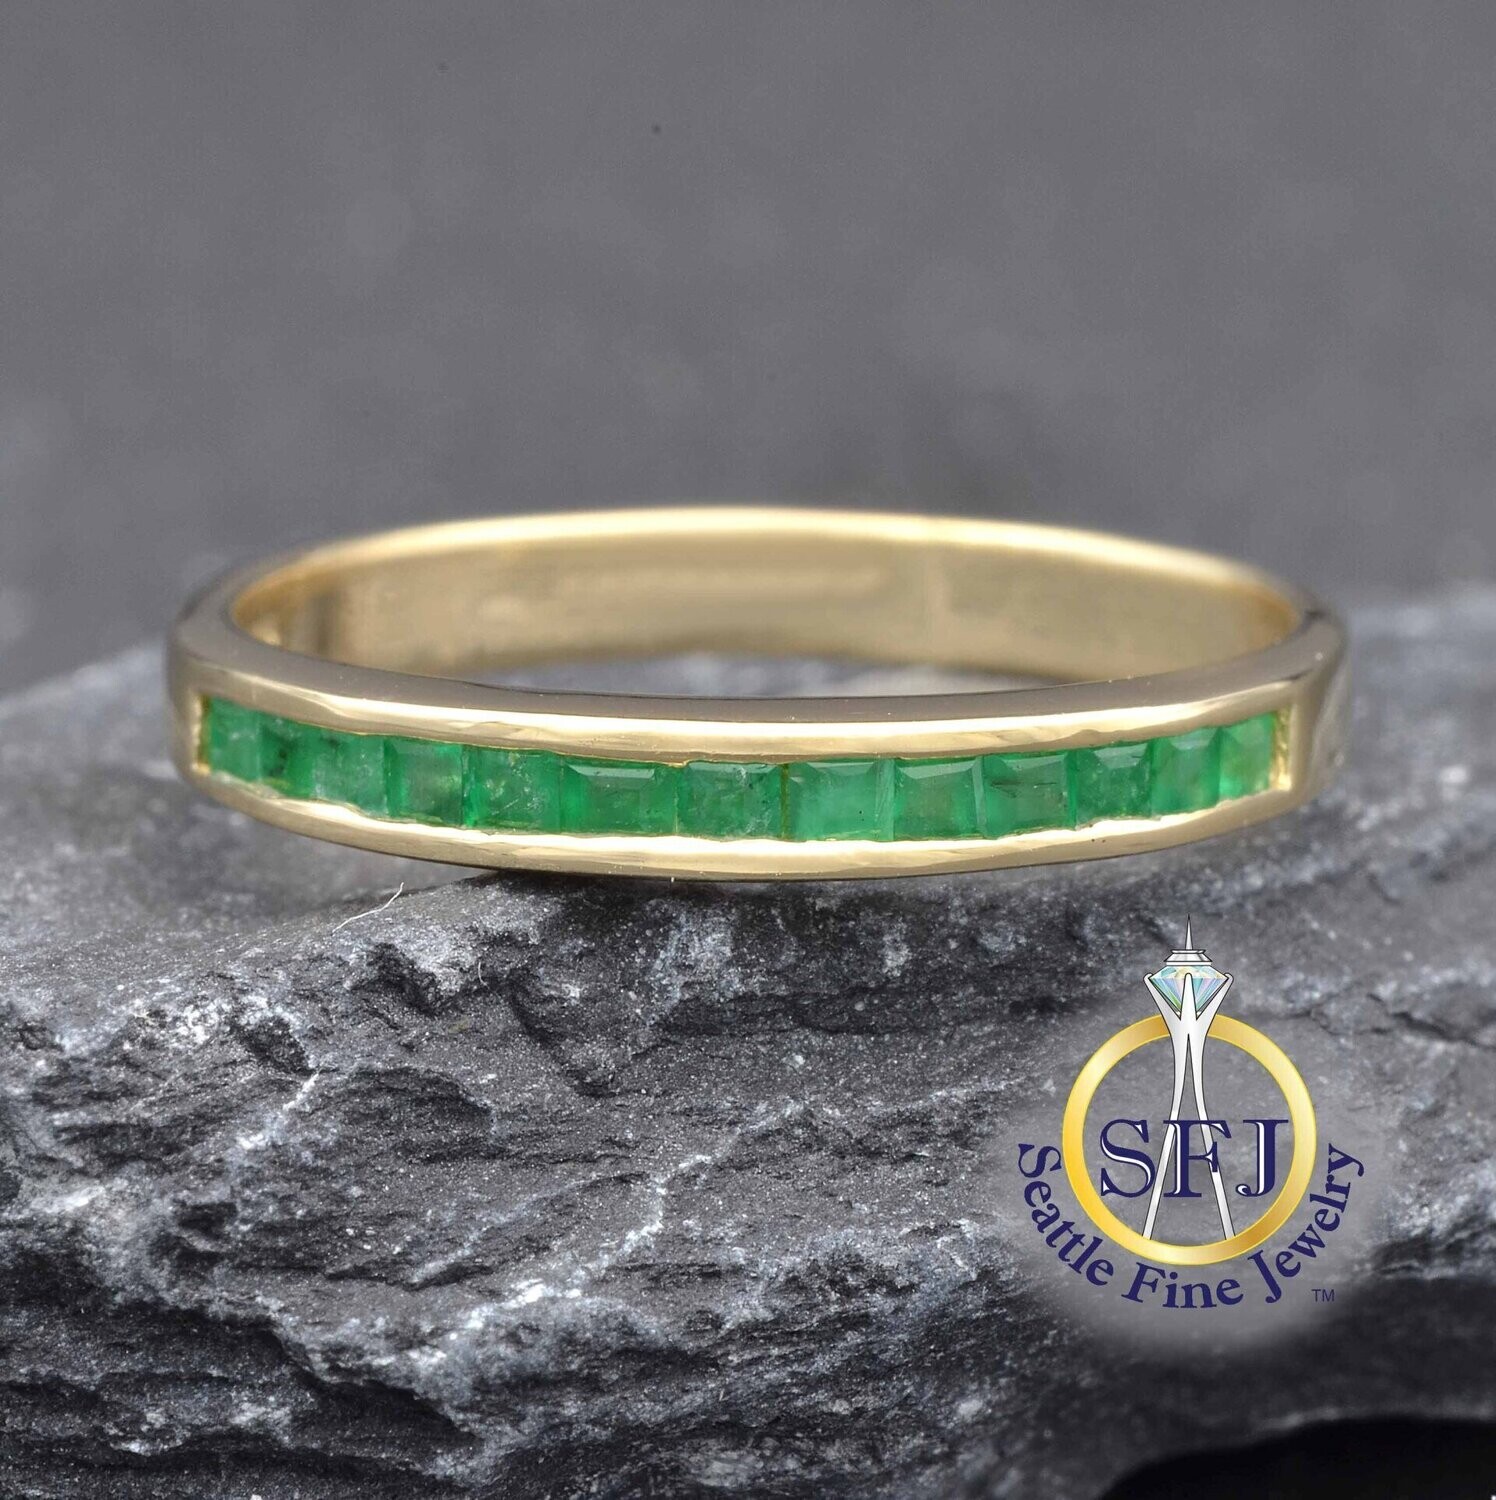 Emerald Band Ring, Solid 14K Yellow Gold